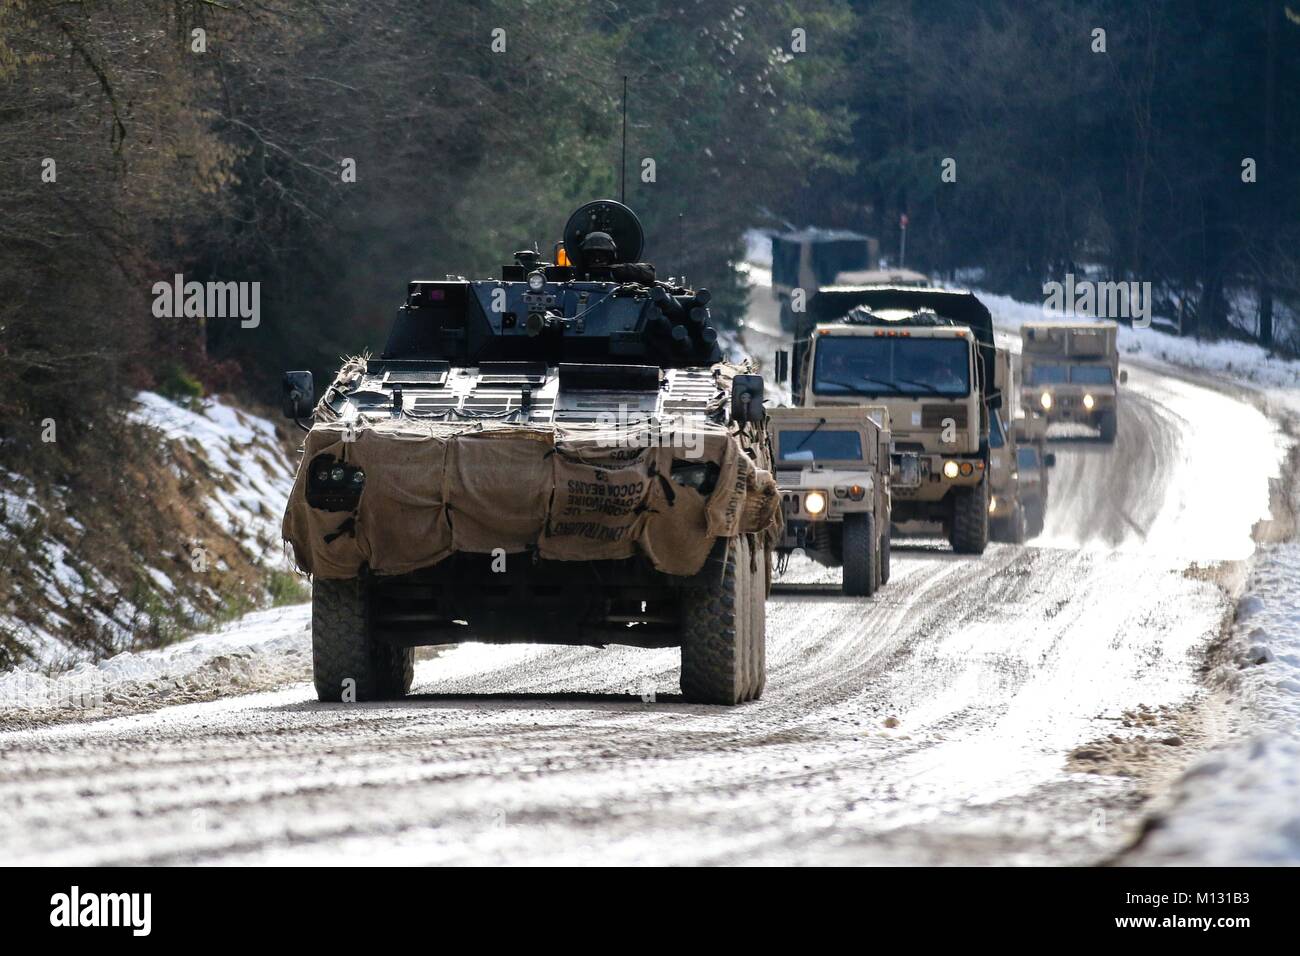 A Polish army Rosomak armored personnel carrier, also called a Wolverine, assigned to the 12th Mechanized Brigade, leads a convoy of Polish and U.S. military vehicles during the Allied Spirit VIII training exercise at Hohenfels Training Area, Germany, Jan. 25, 2018. Allied Spirit VIII is a multinational exercise with over 4,100 participants from 10 nations that is designed enhance interoperability among participating nations and readiness across the U.S. military's war-fighting functions. (U.S. Army photo by Spc. Hubert D. Delany III / 22nd Mobile Public Affairs Detachment)  Stock Photo